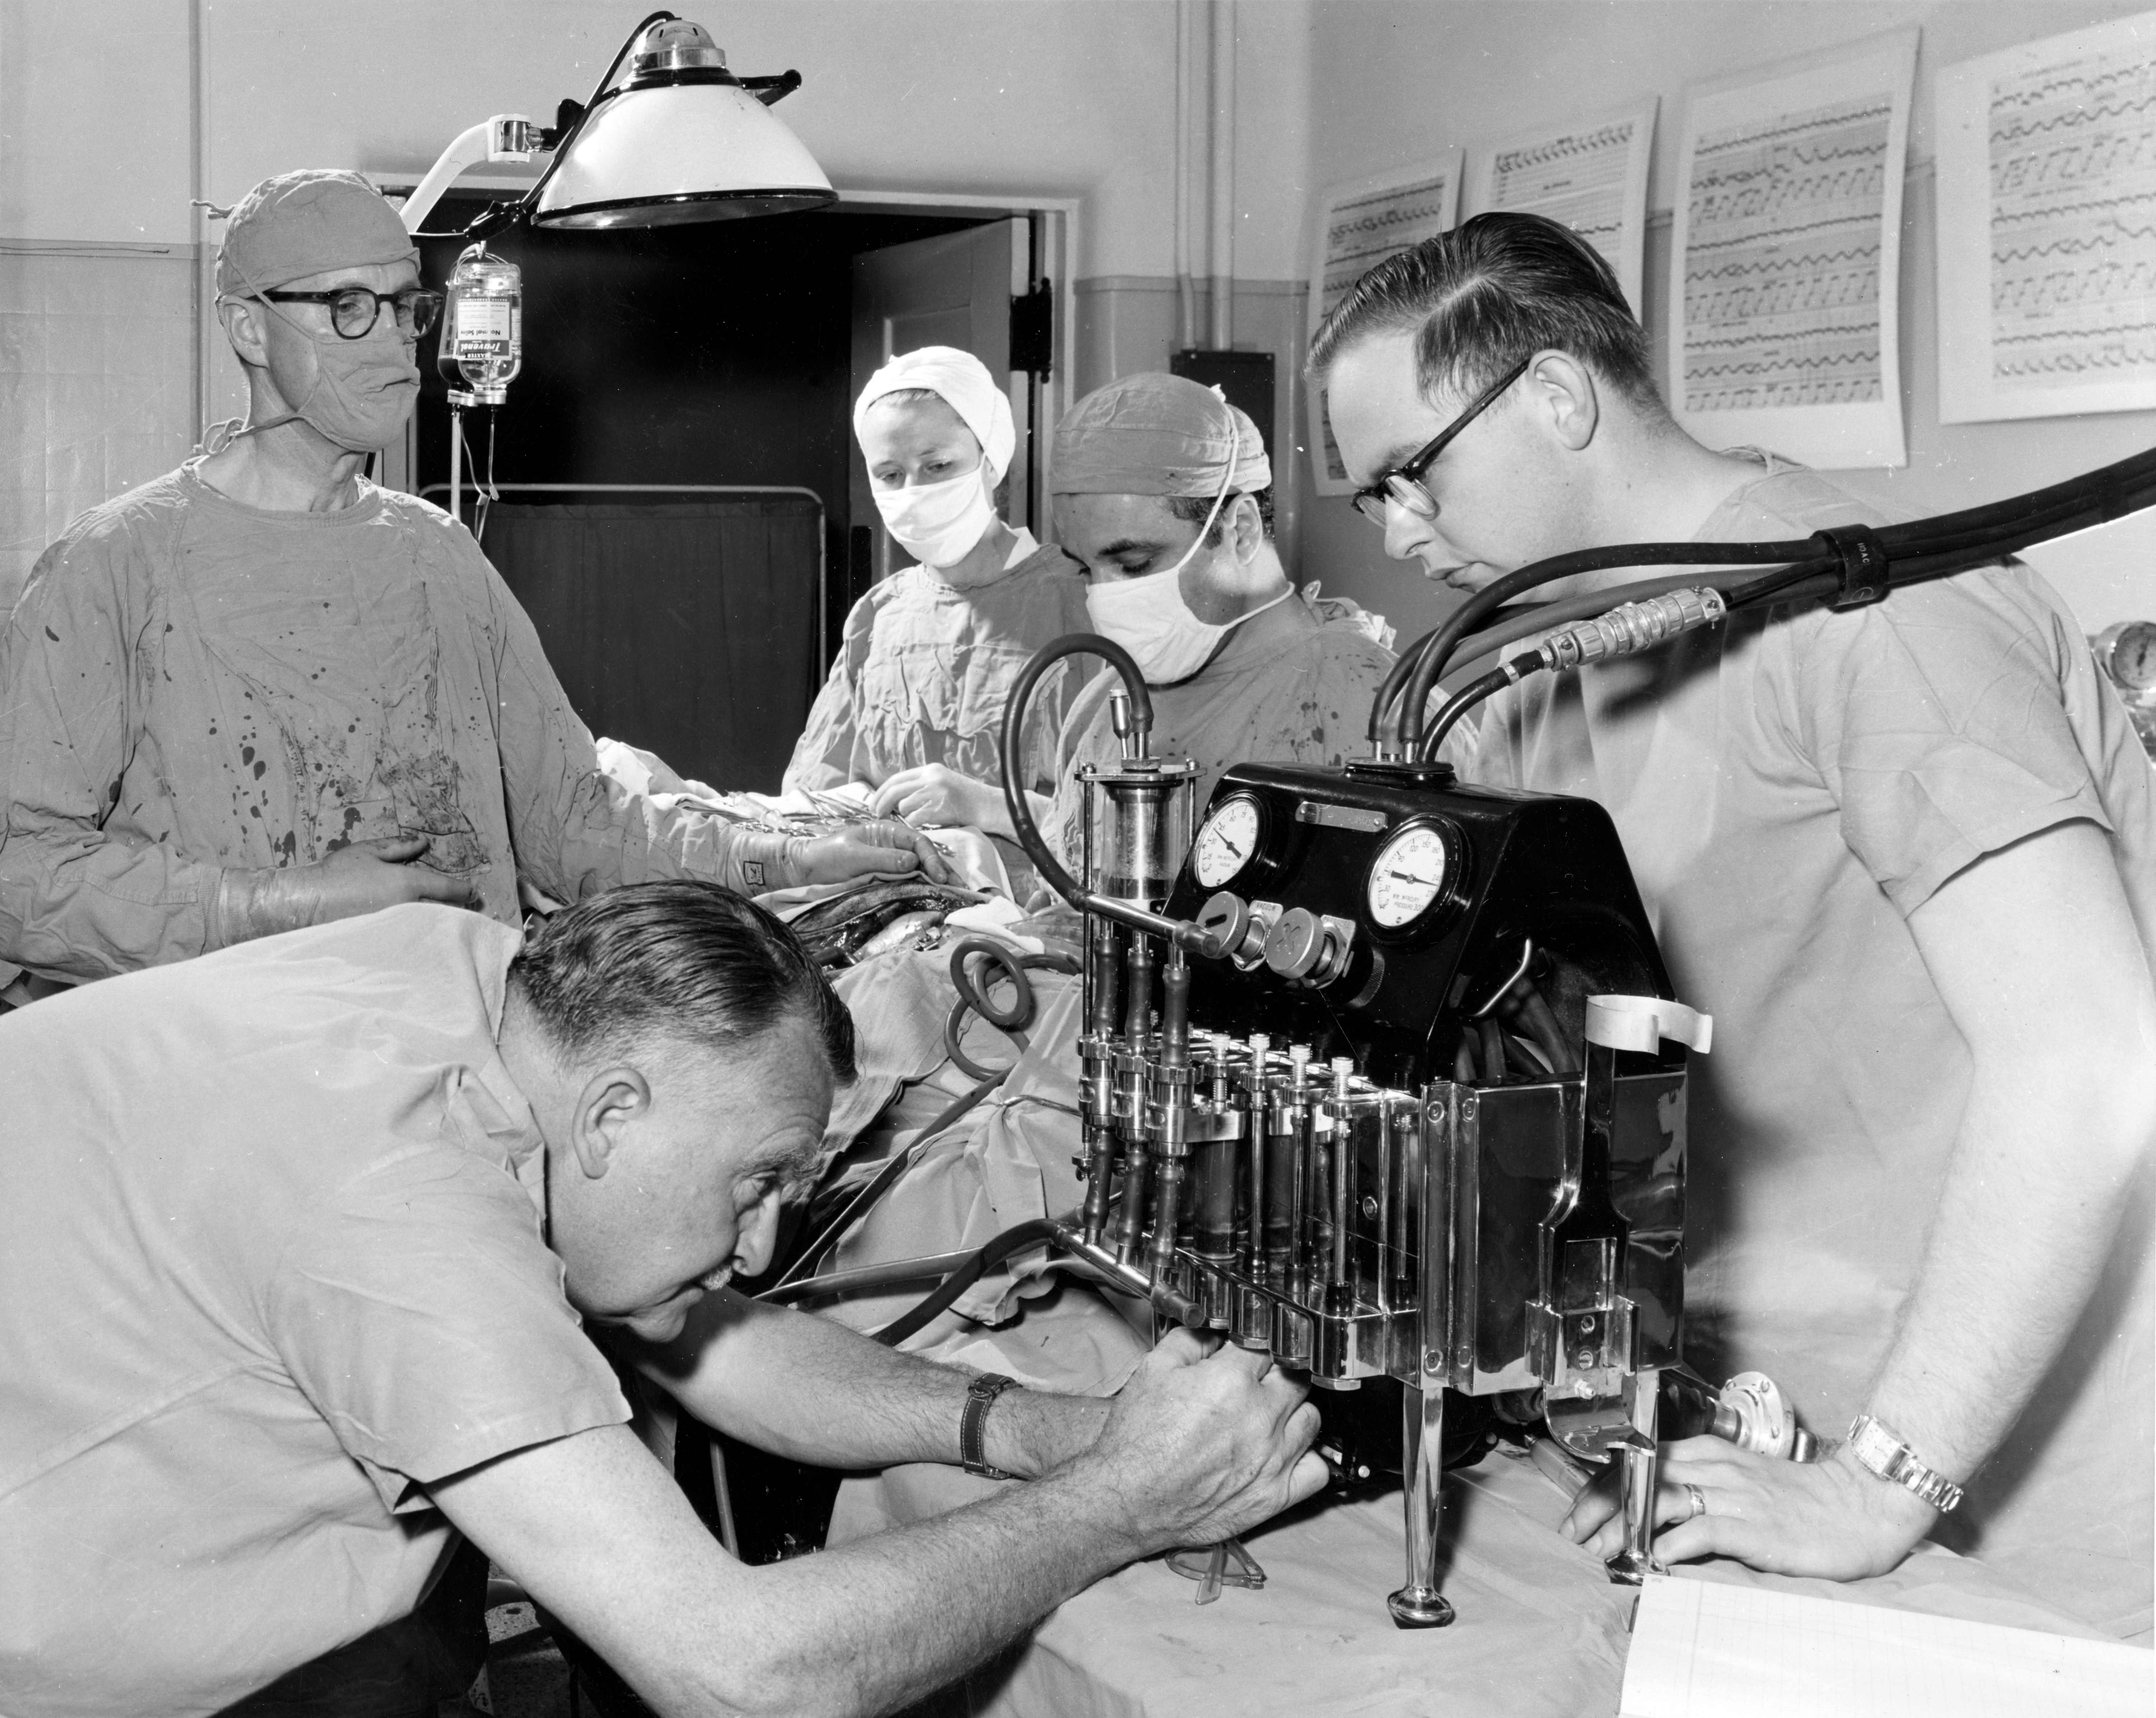 r. Forest Dewey Dodrill became the first surgeon to use a mechanical heart pump on a patient.